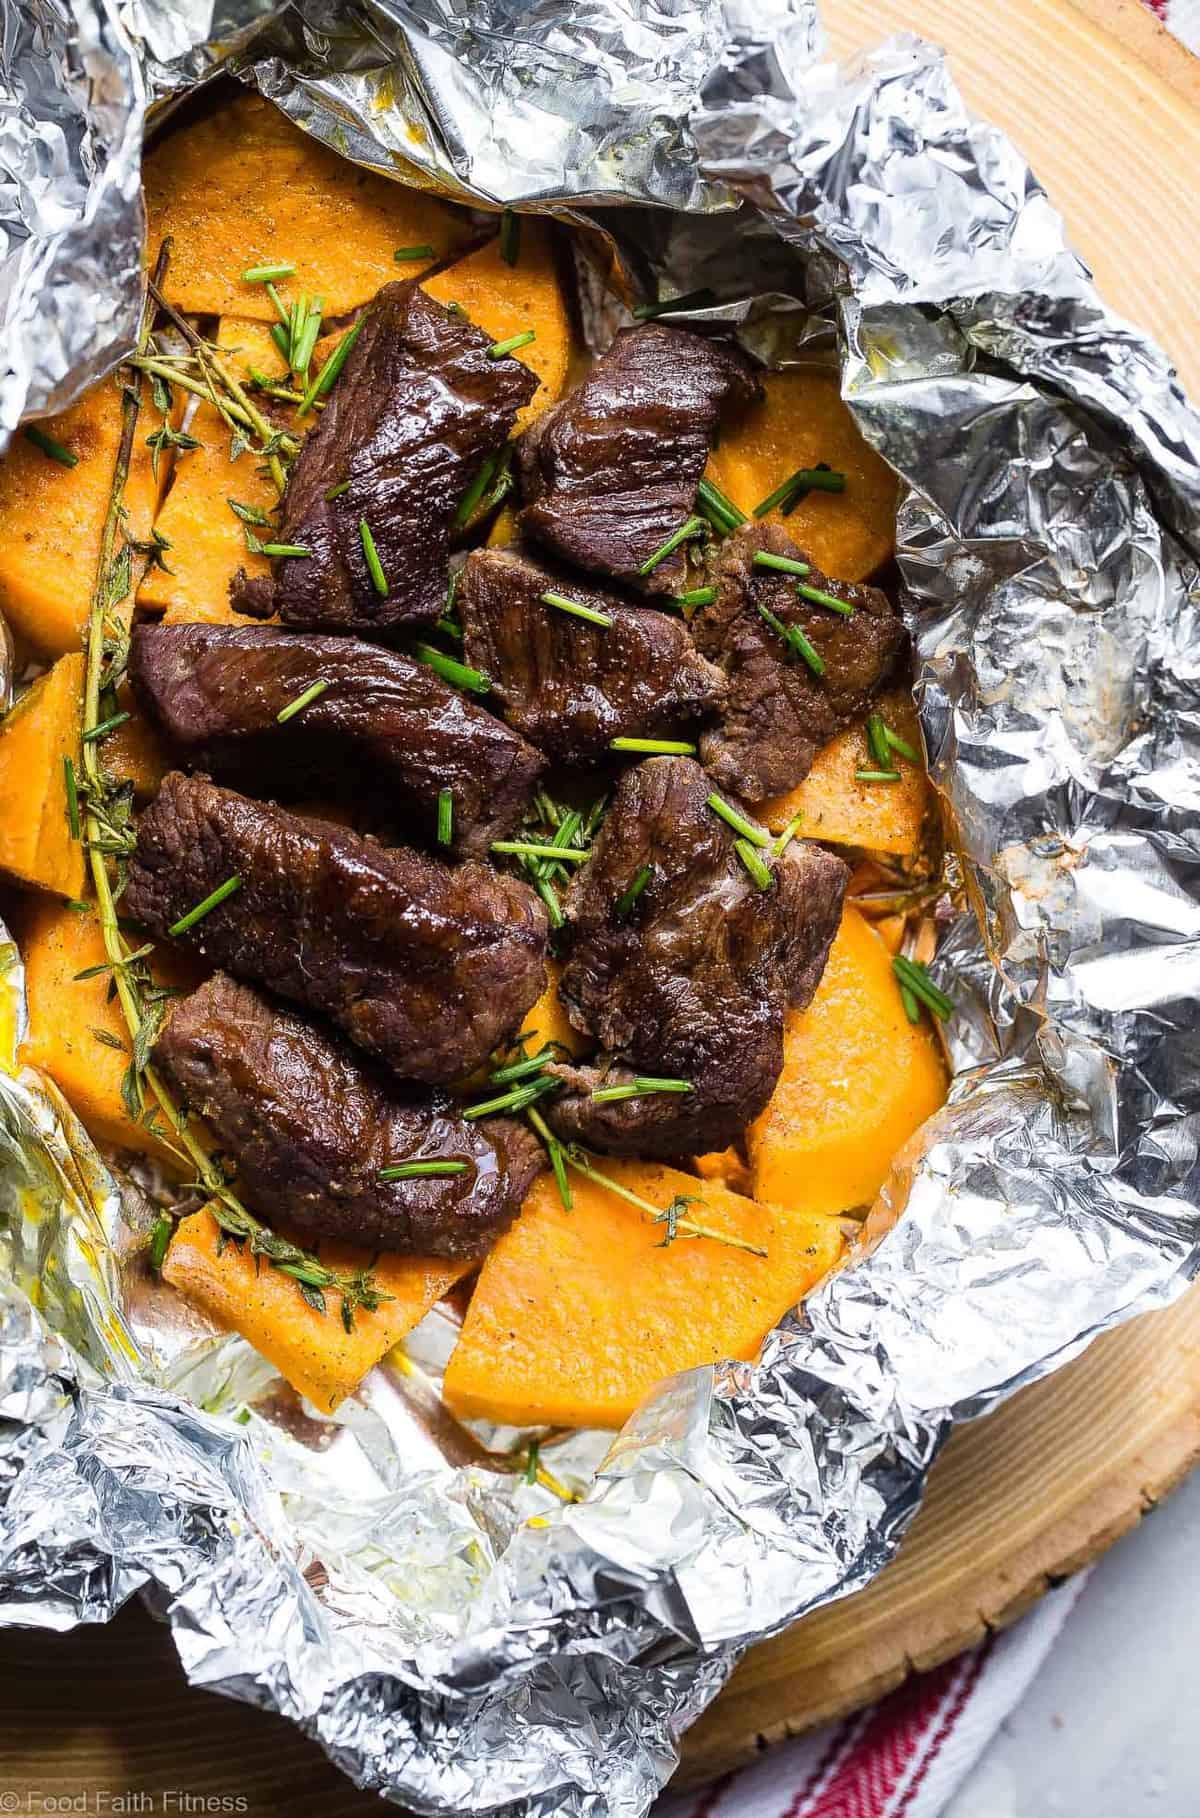 Garlic Steak and Potato Foil Packets - These EASY Steak Foil Packets are an easy, healthy and whole30 approved summer dinner with only 6 ingredients and 300 calories! Sure to please even the pickiest of eaters! | #Foodfaithfitness | #Glutenfree #Paleo #Whole30 #Grilling #Dairyfree